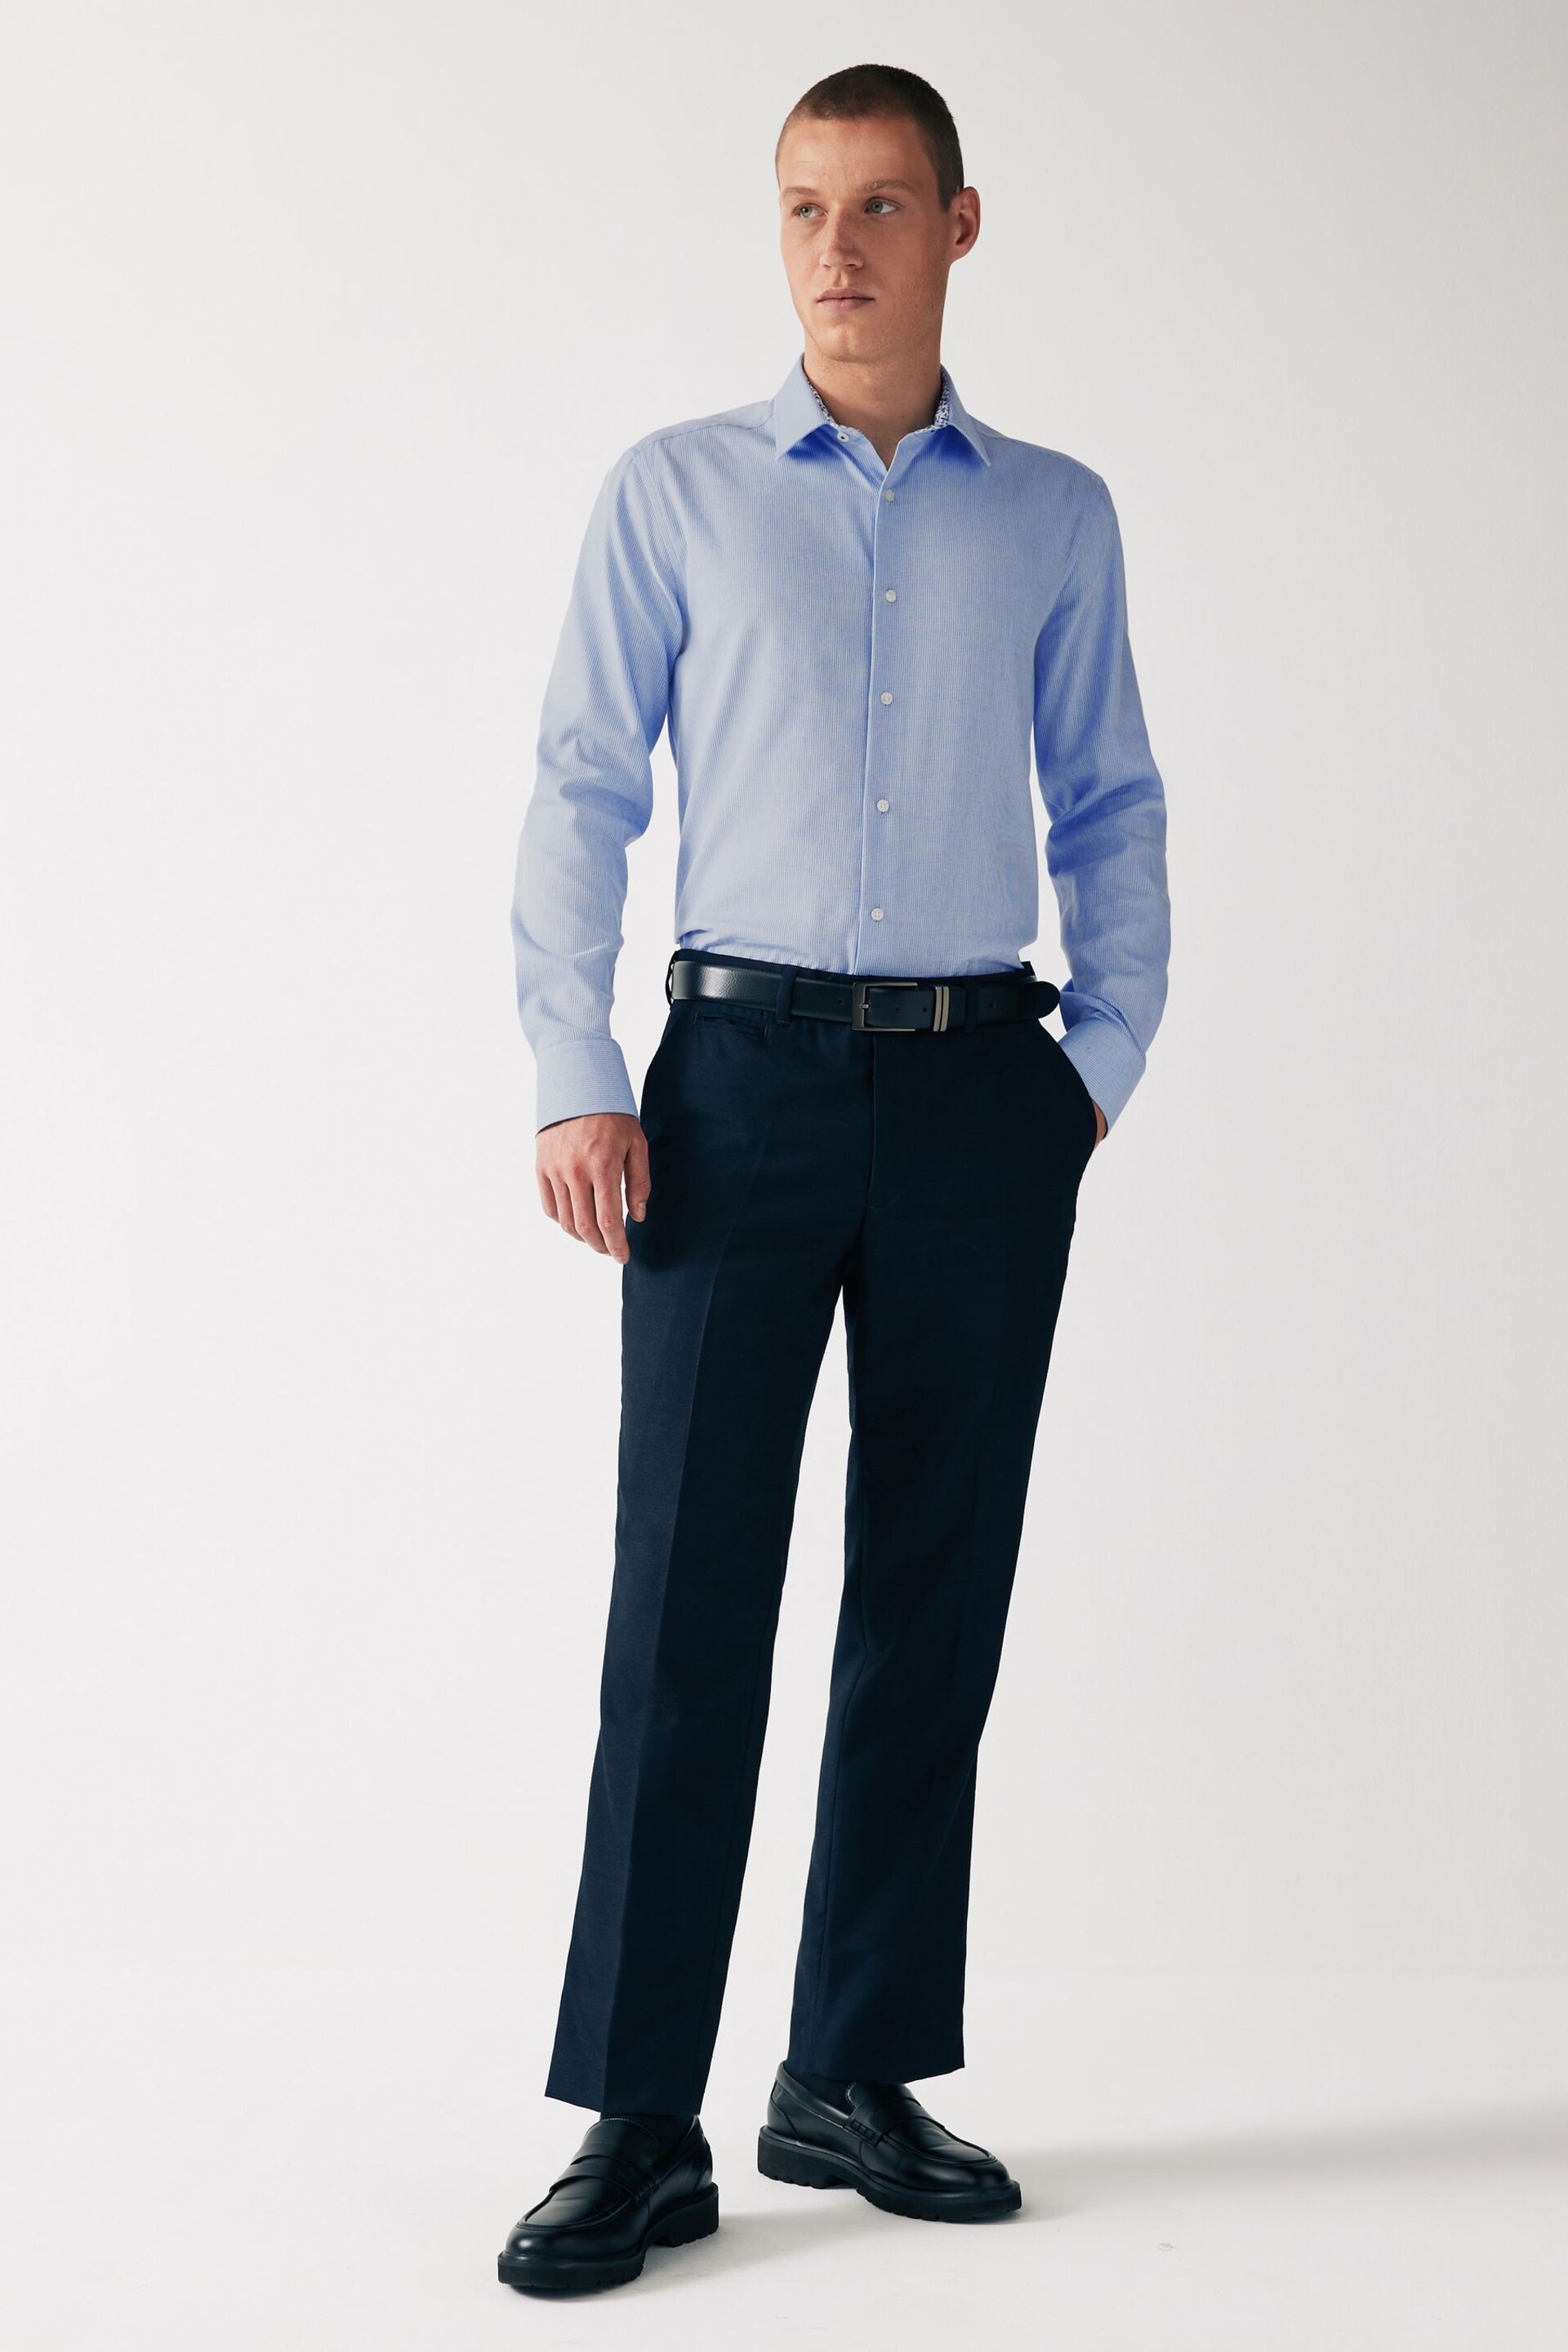 Blue Textured Trimmed Single Cuff Formal Shirt - Image 2 of 6